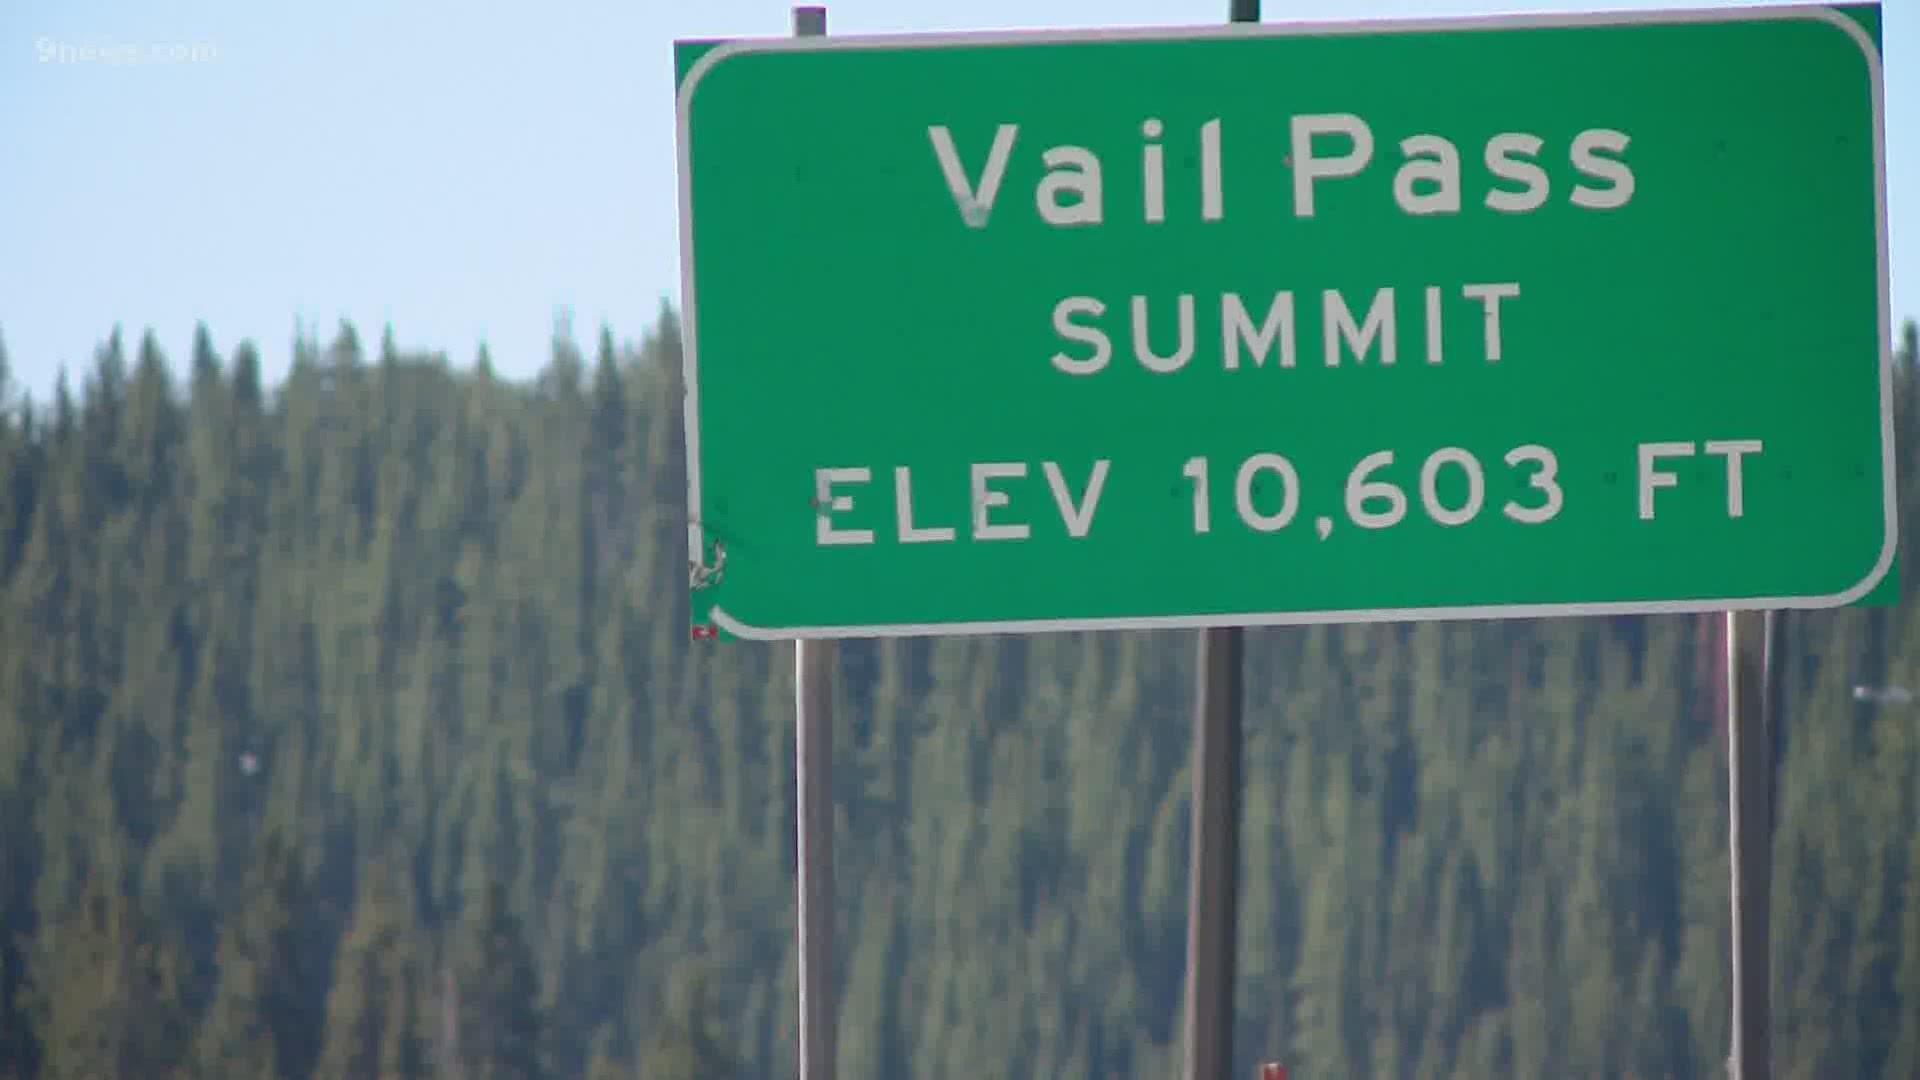 CDOT said the improvements could reduced Vail Pass crashes by 40%, decreasing the average of 400 closure hours every year. Work is scheduled to begin in 2021.